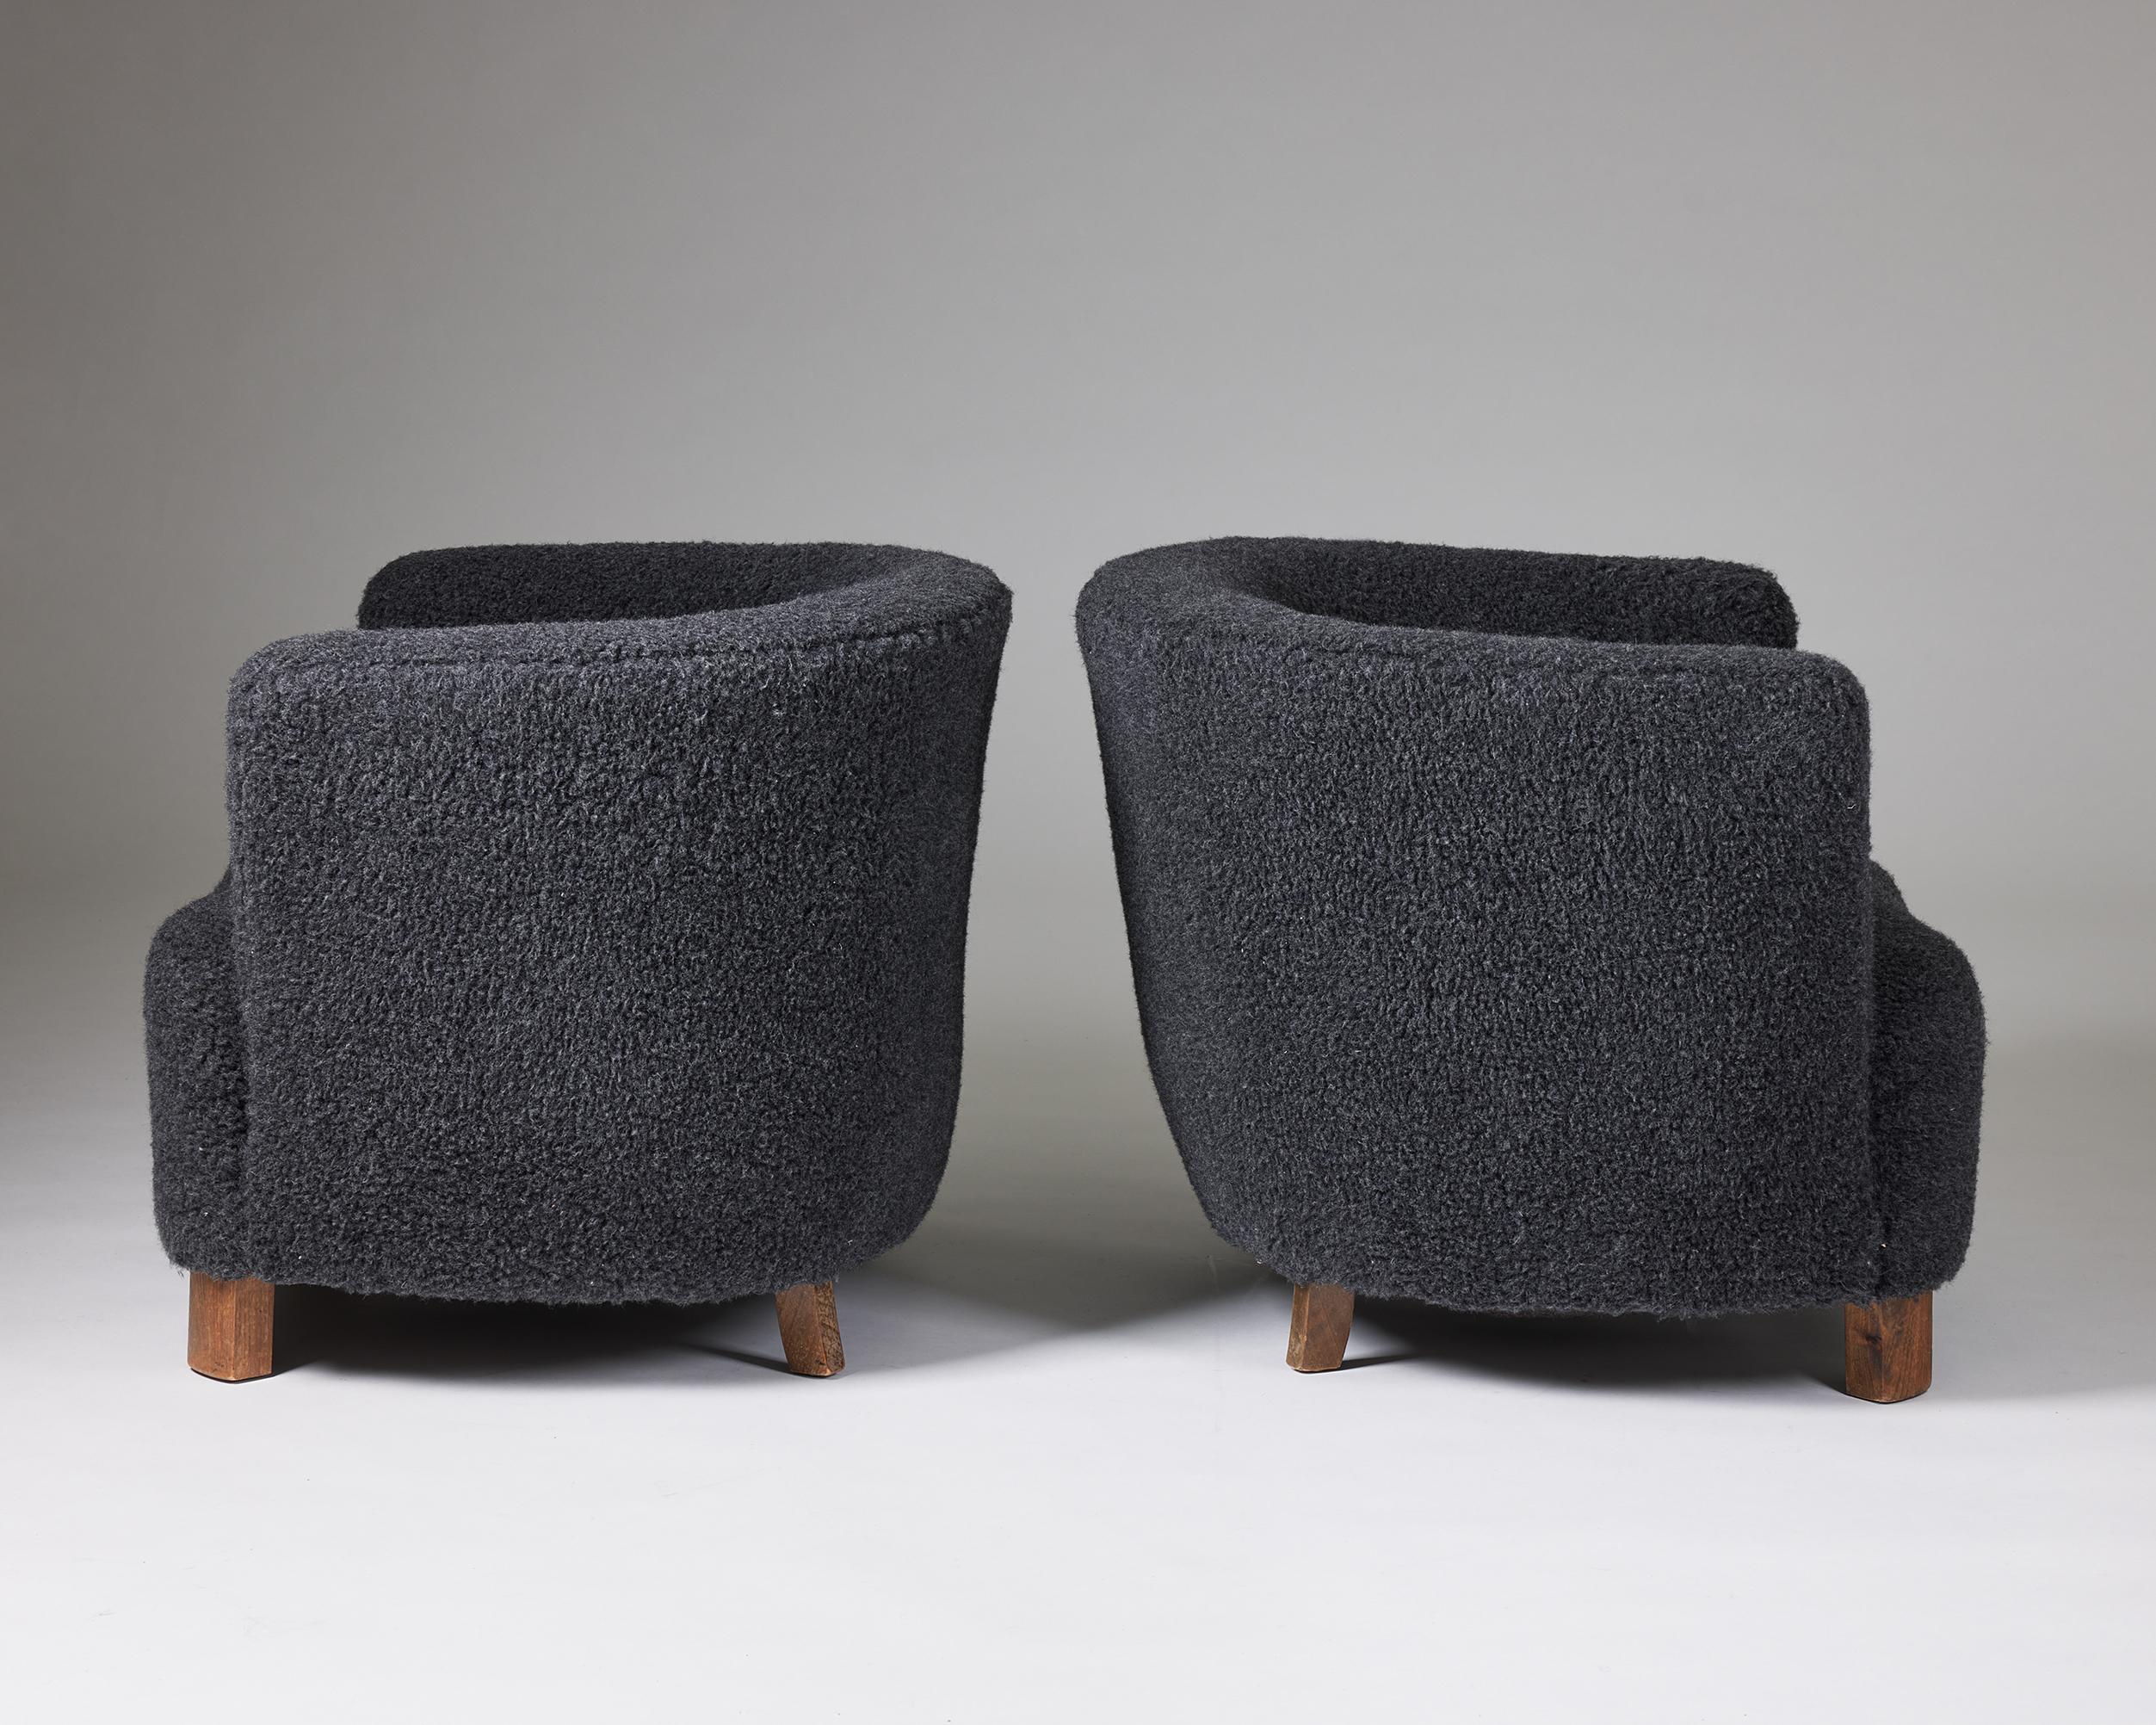 20th Century Pair of Easy Chairs Designed by a Danish Cabinetmaker, Denmark, 1940s